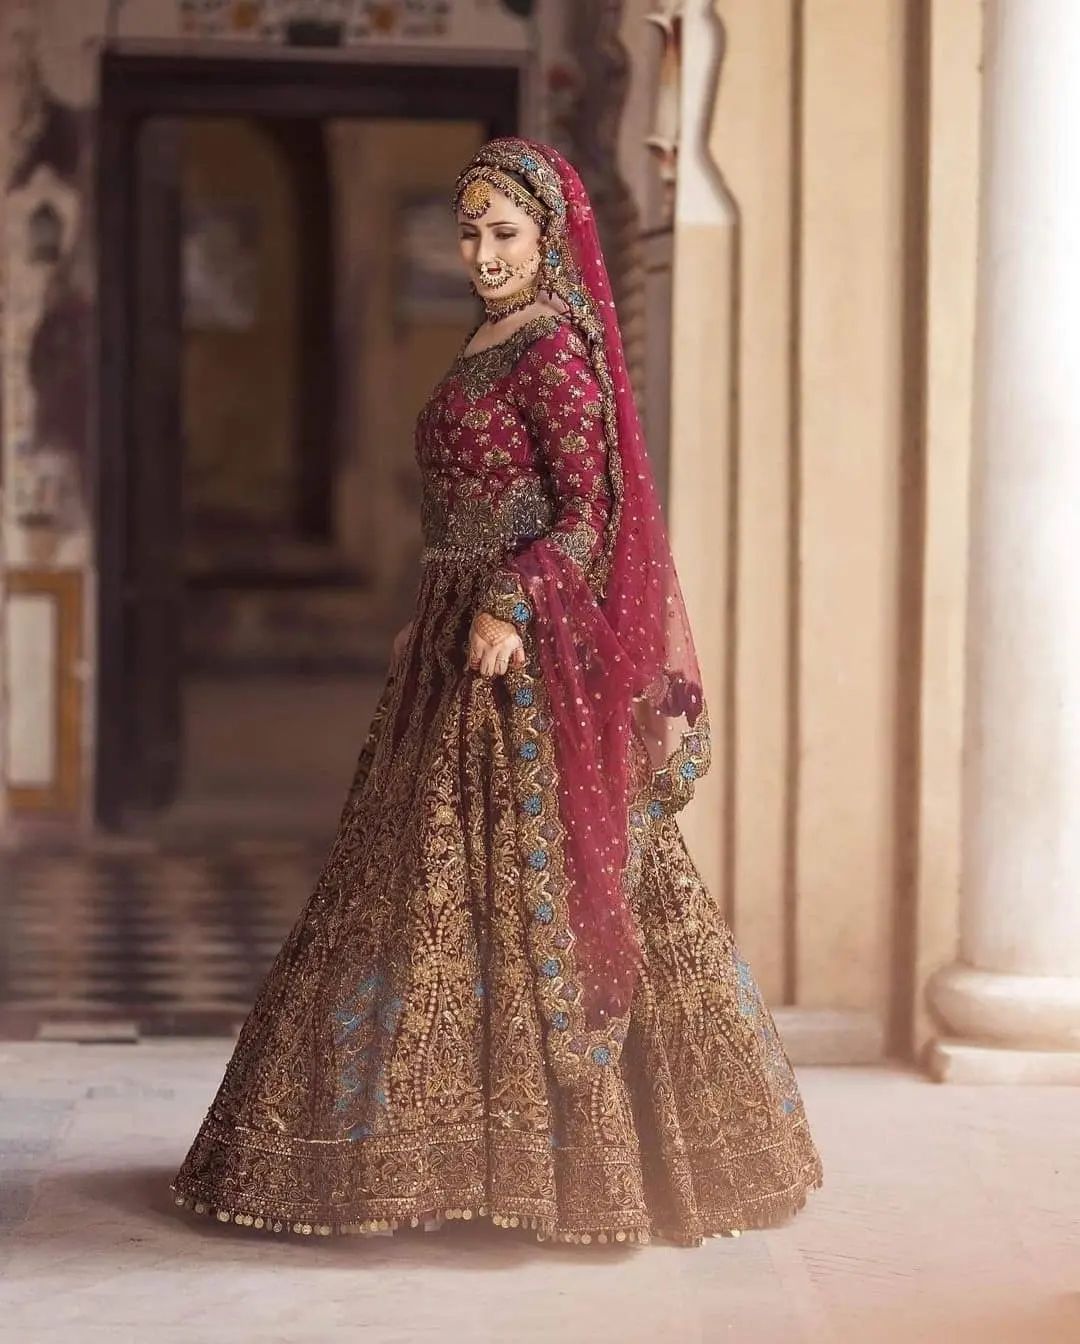 Is Powder Pink The New Red In Bridal Lehengas In 2021-22? | WedMeGood